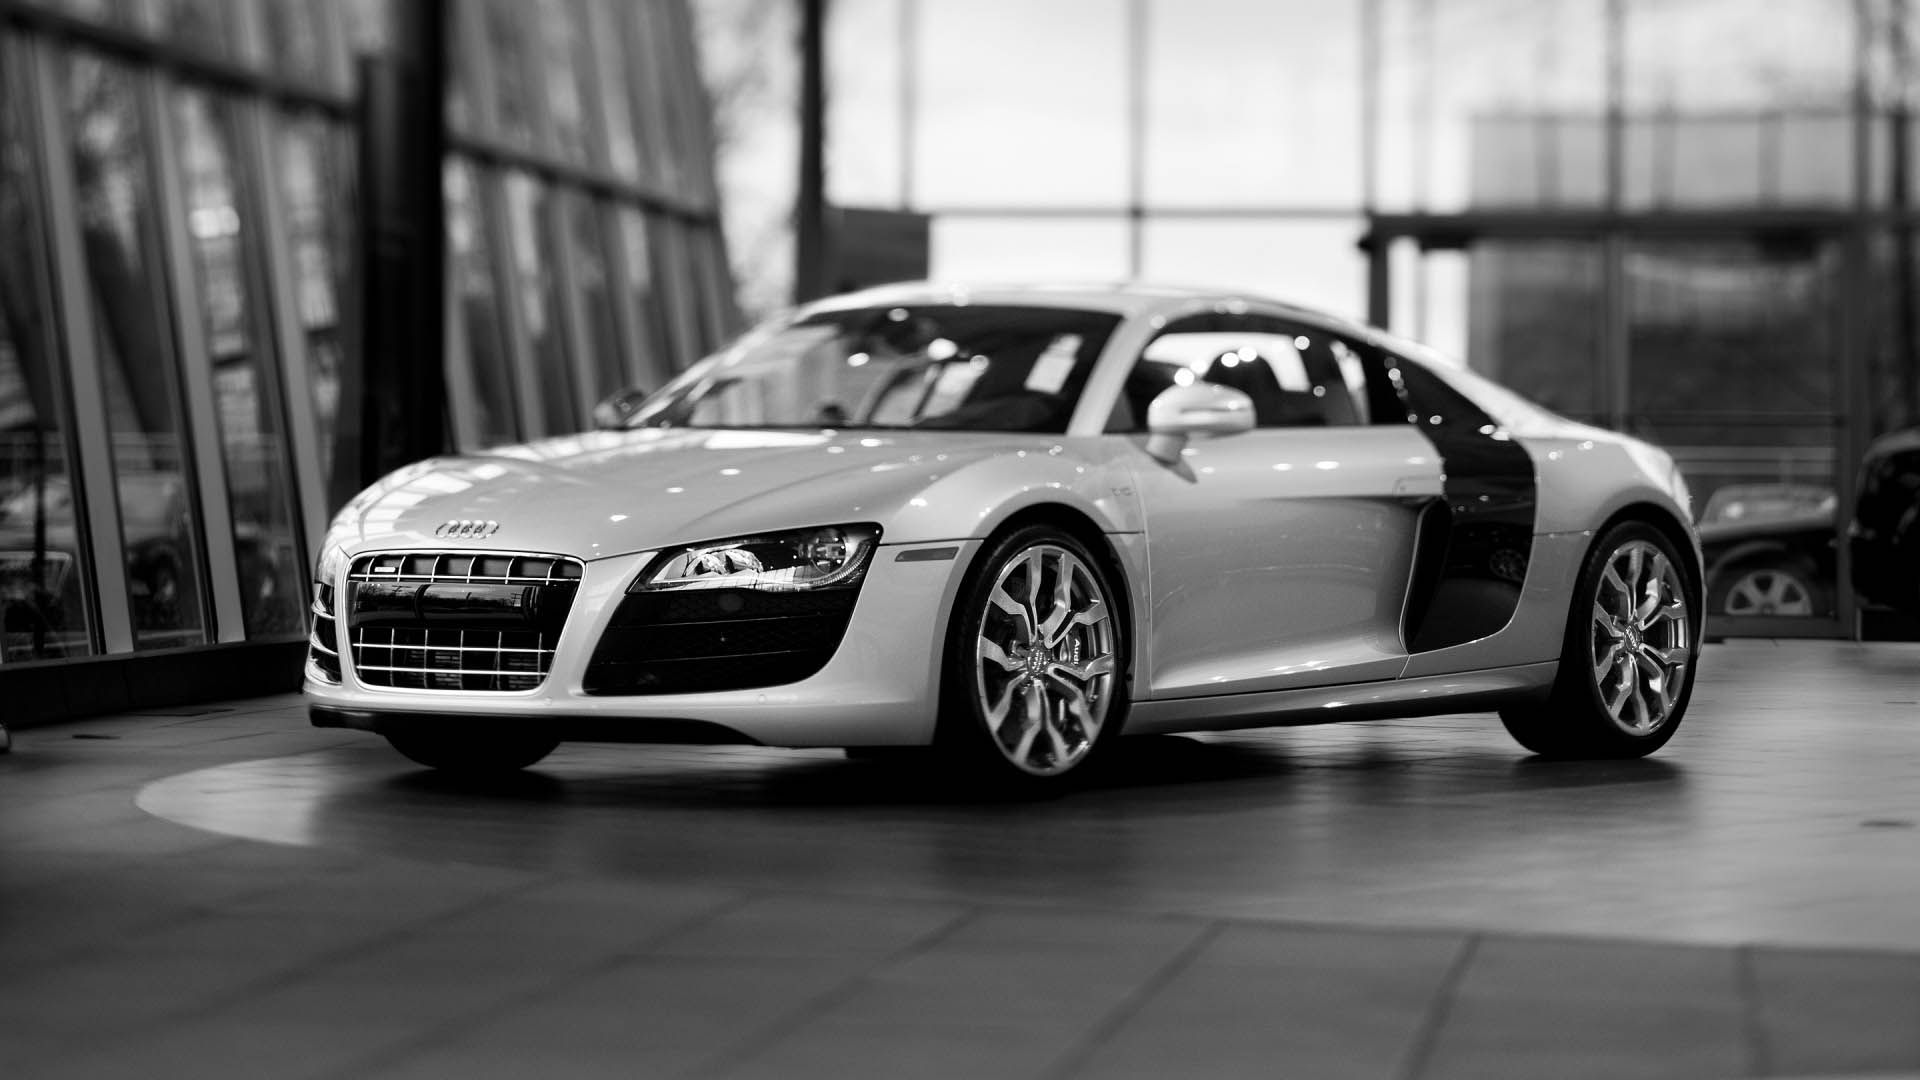 Audi R8 Wallpapers Hd Group 88 Images, Photos, Reviews